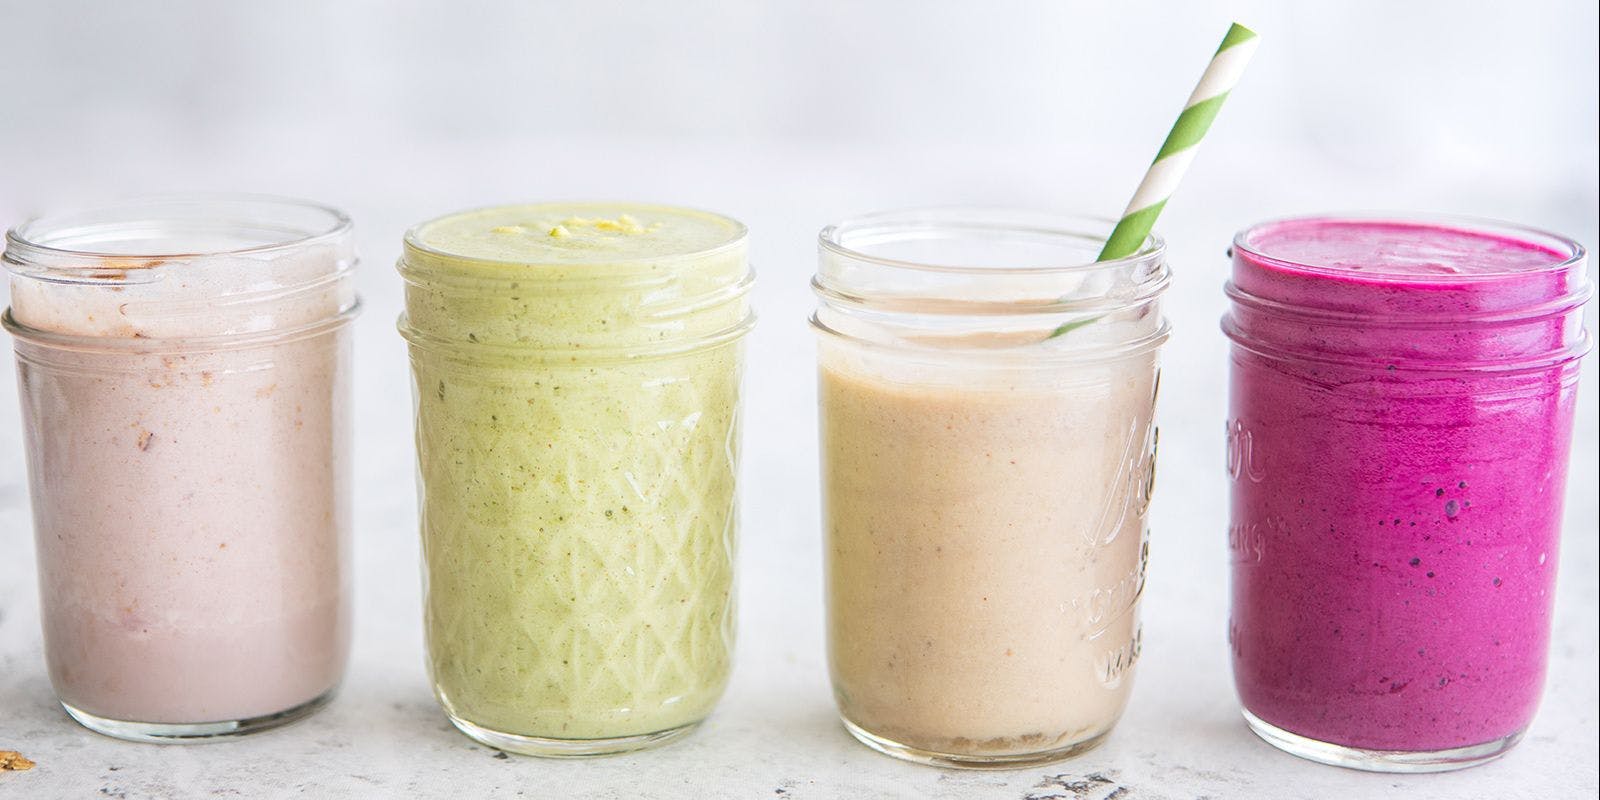 4 healthy smoothie recipes. Photo contributed by Rebecca Clyde.